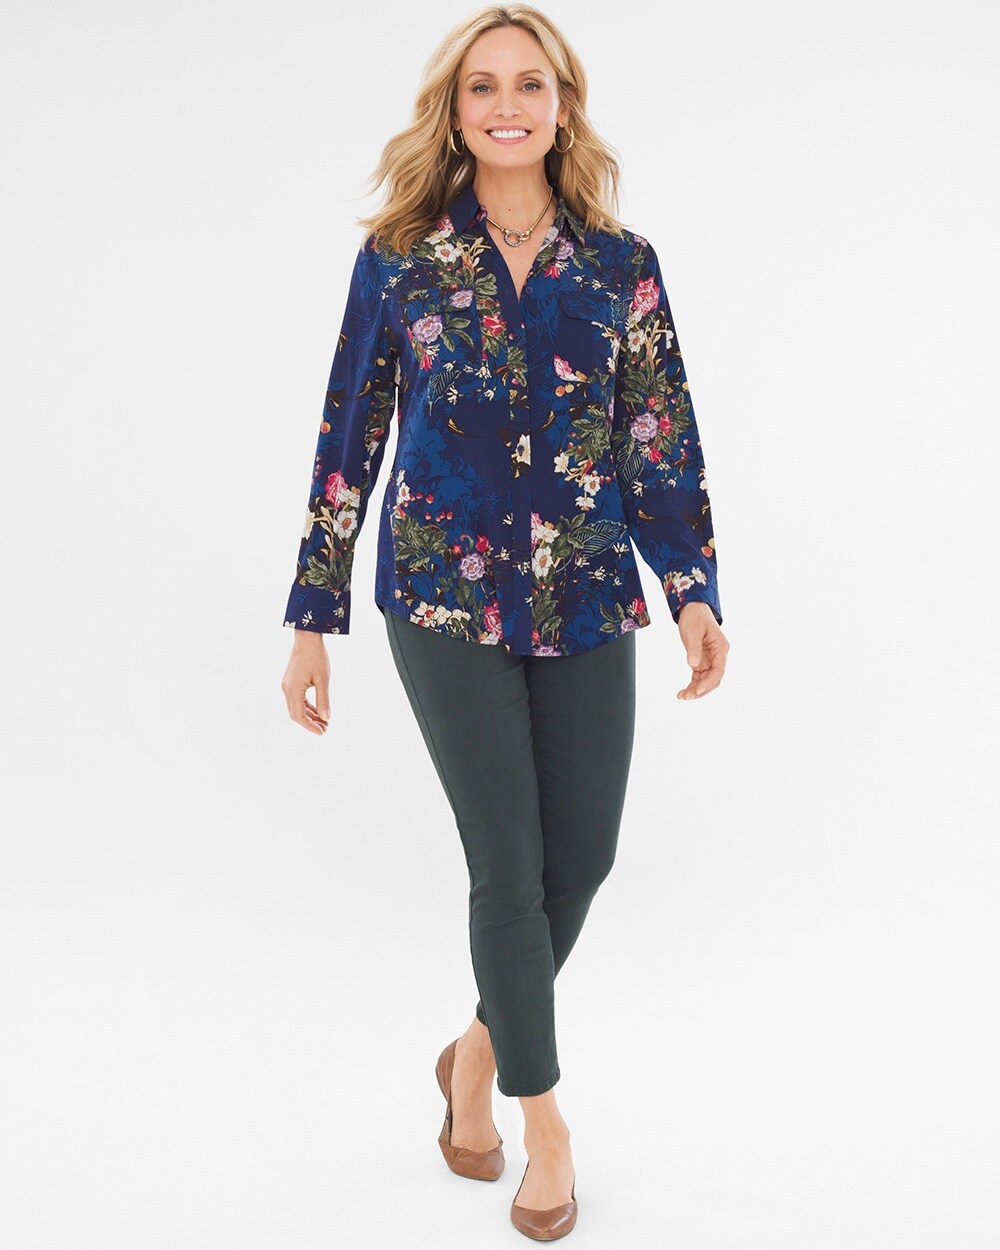 Silky Soft Floral Terrace Shirt - Chico's